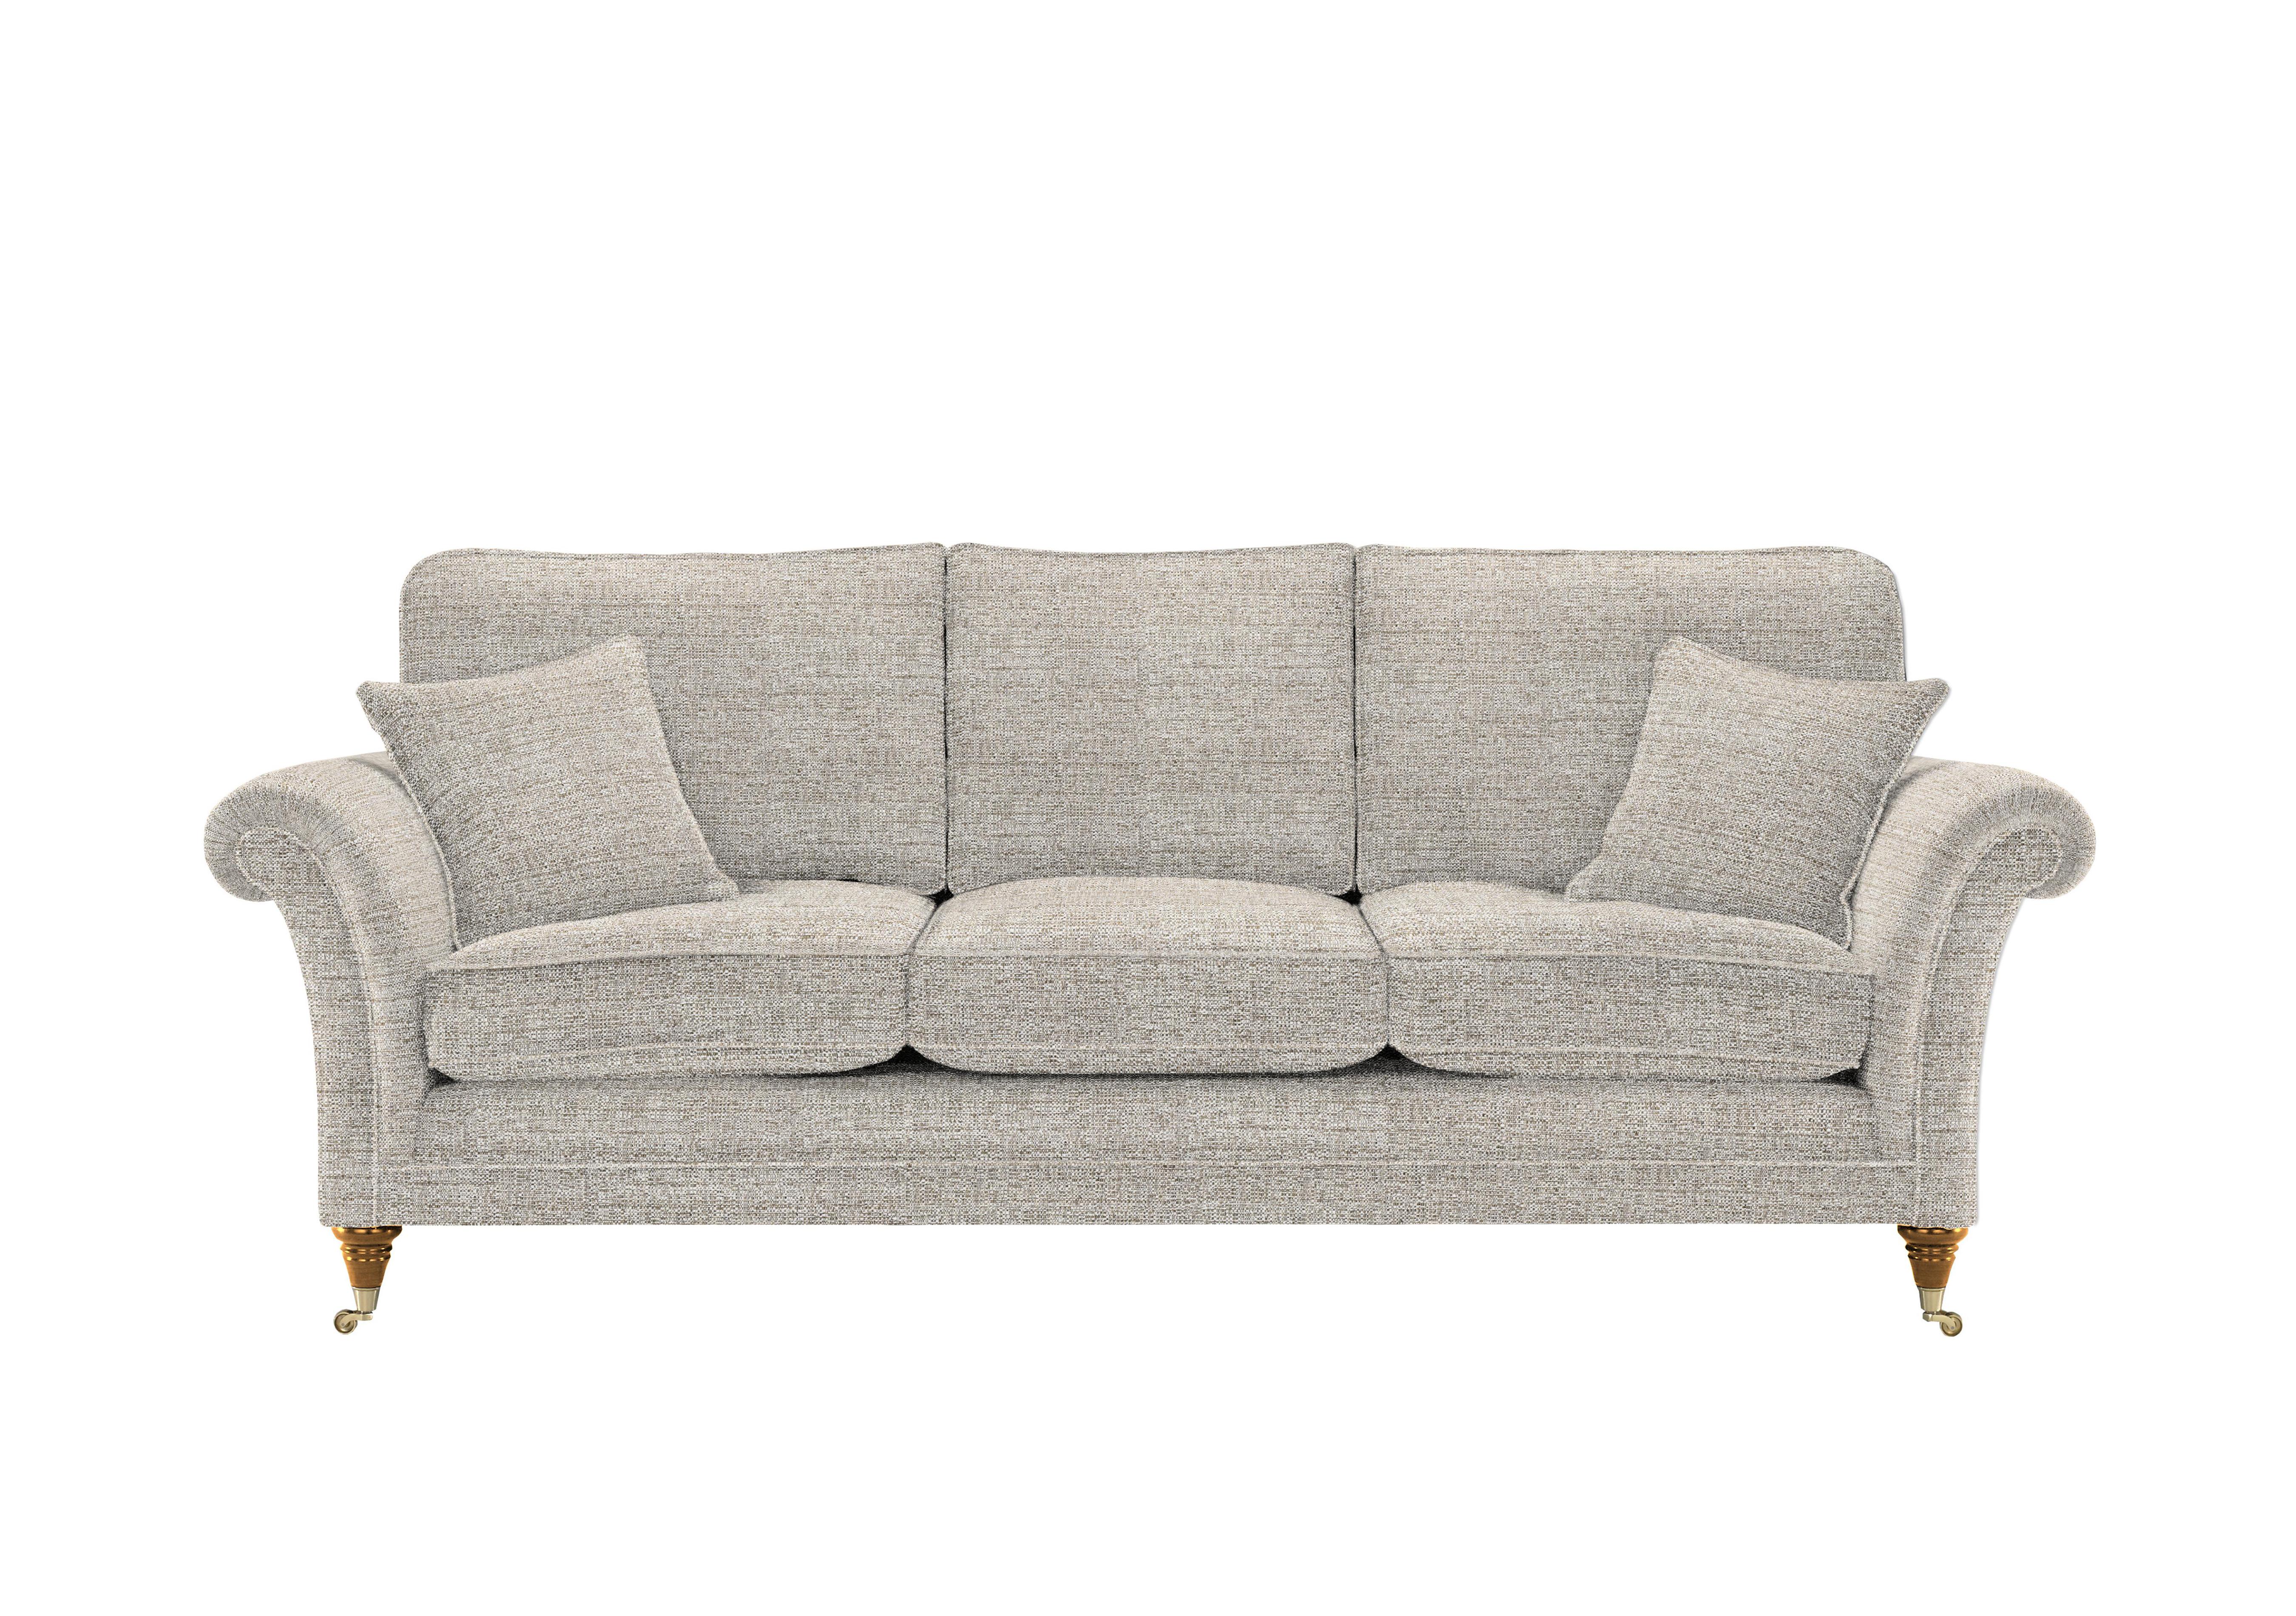 Burghley Grand 3 Seater Sofa in 1300-0059 Caledonian Pebble on Furniture Village